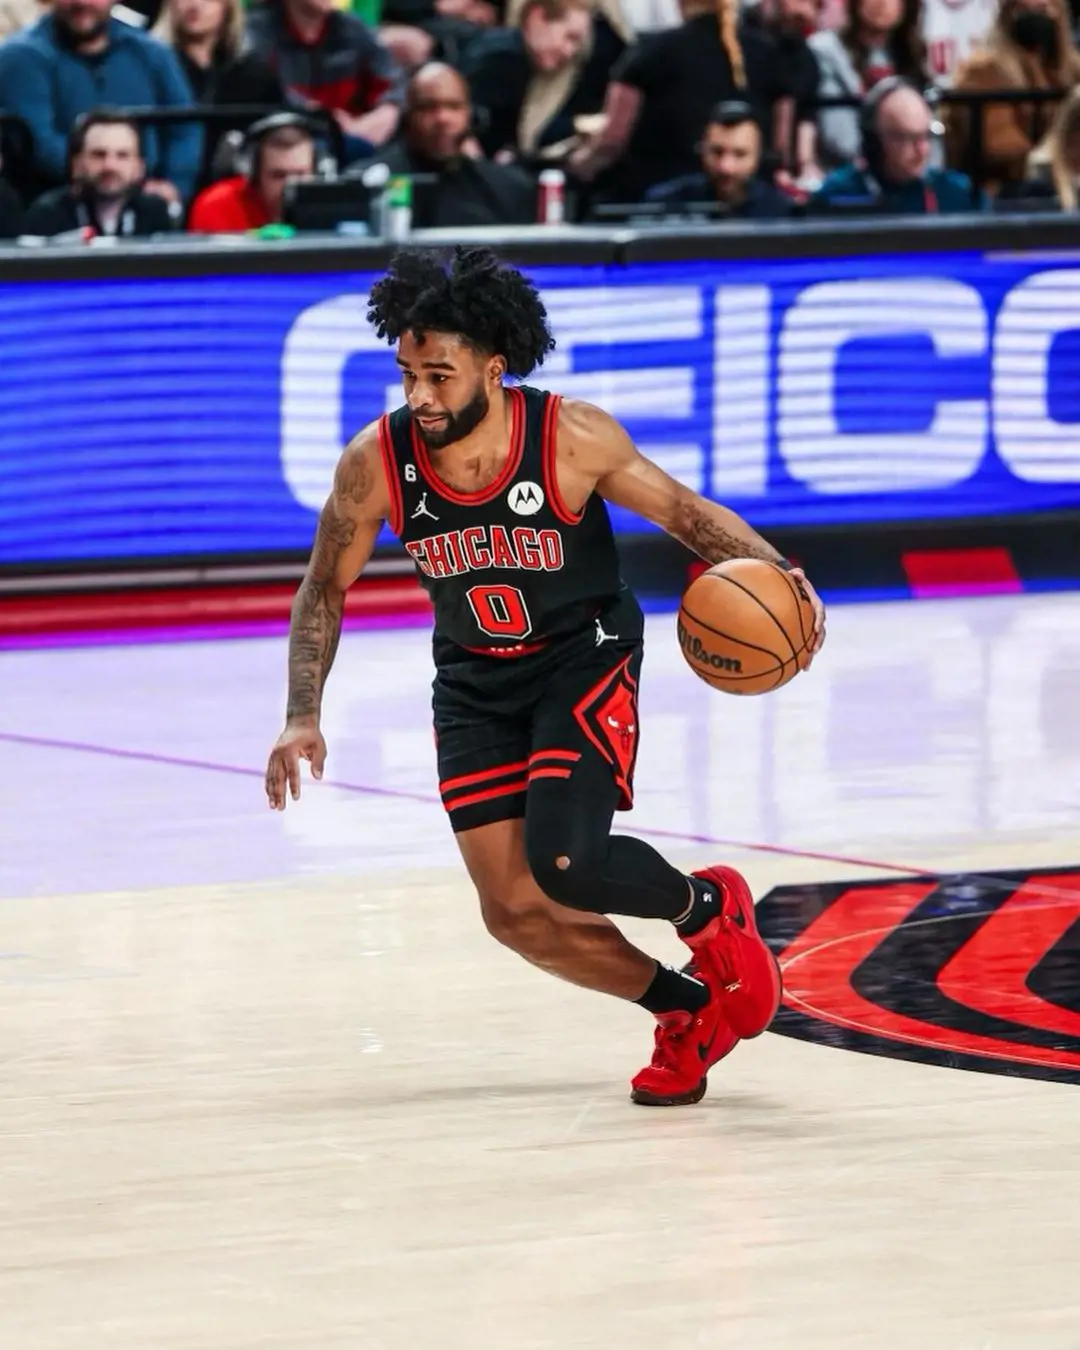 Coby White in the Bull's jersey playing in the NBA game to make the playoffs